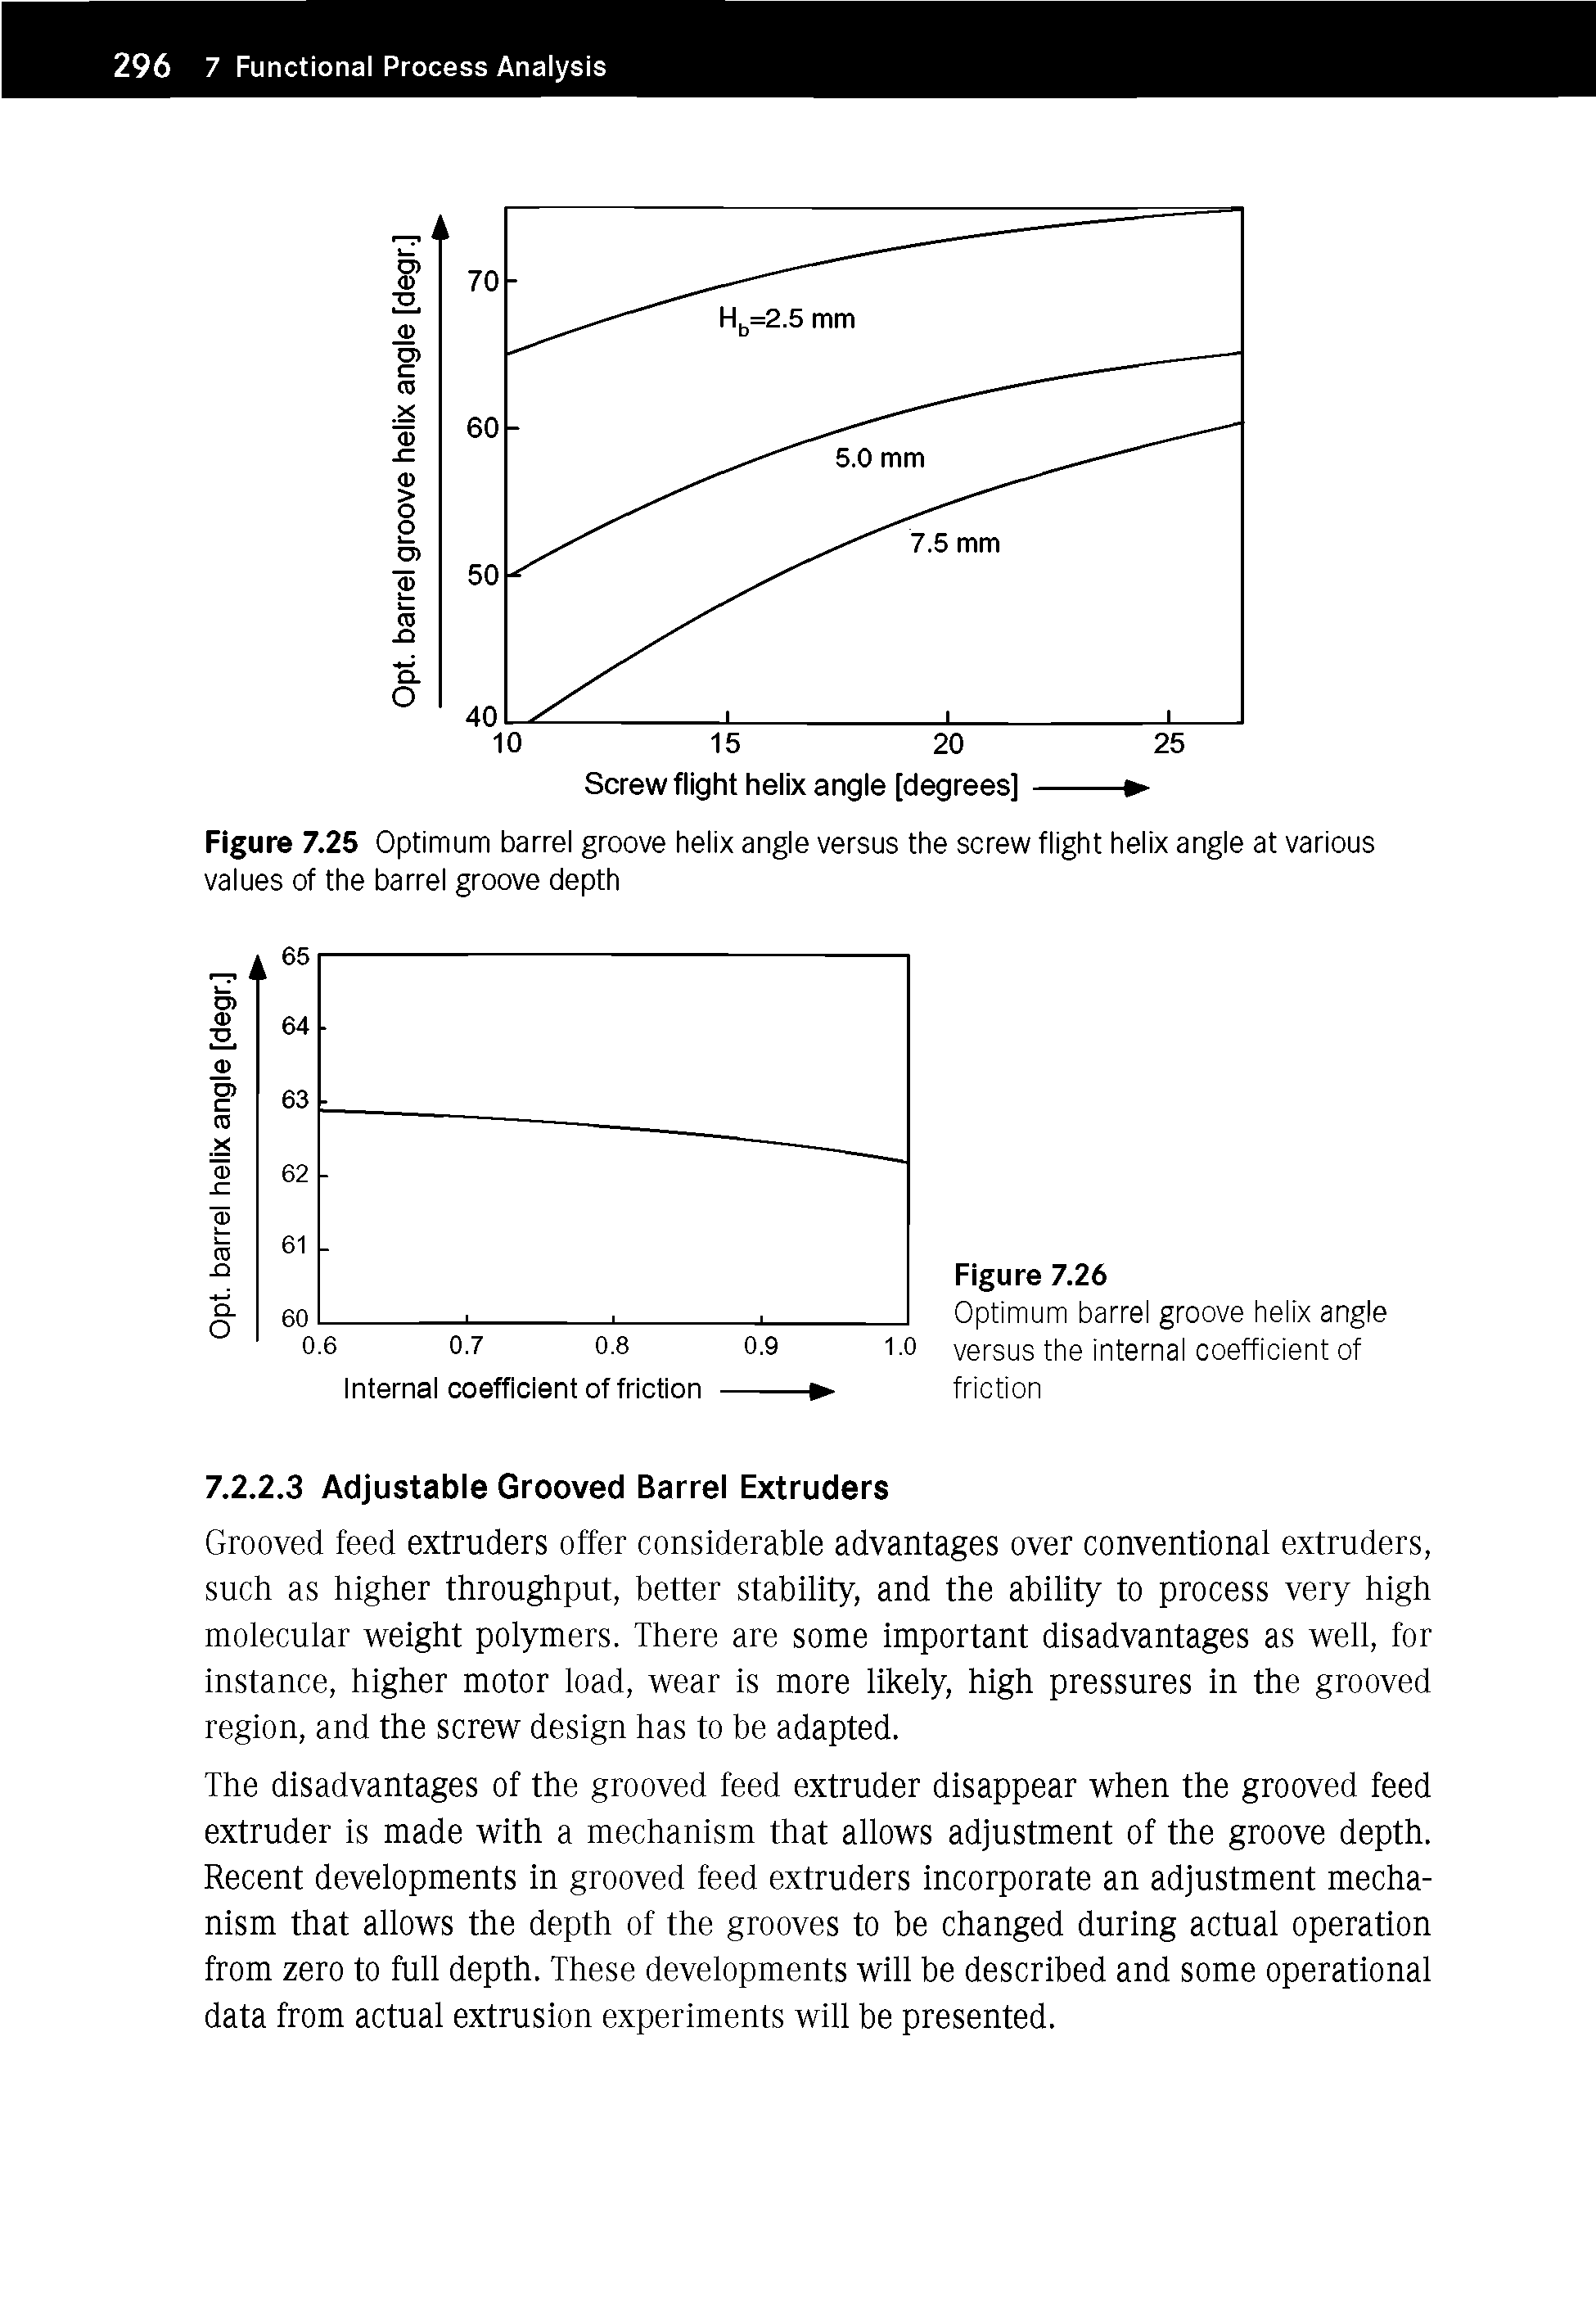 Figure 7.25 Optimum barrel groove helix angle versus the screw flight helix angle at various values of the barrel groove depth...